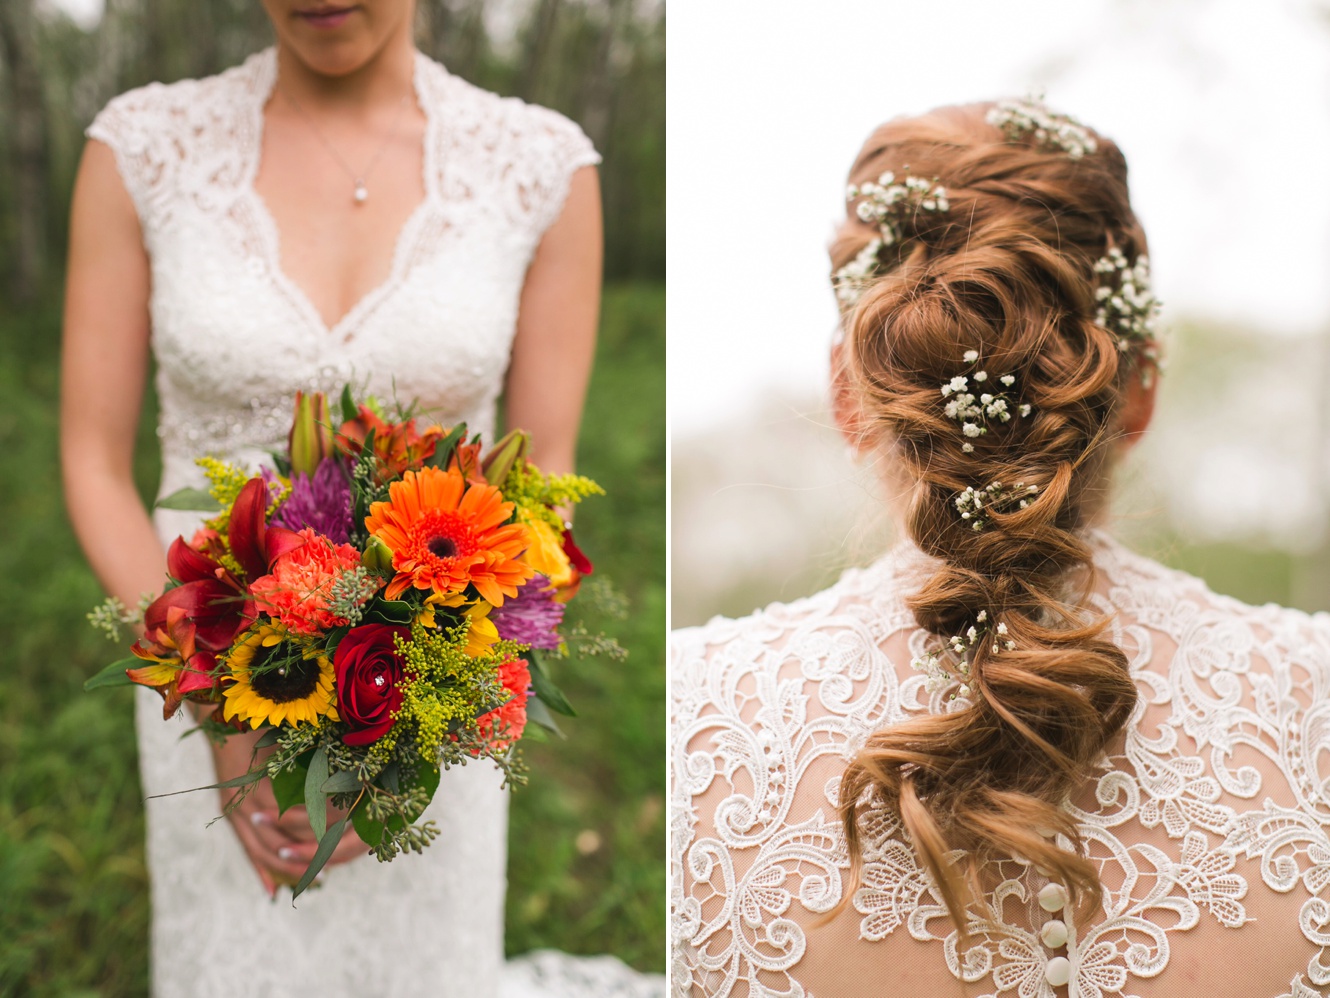 loose braid hair style inspiration for the bride on her wedding day photo